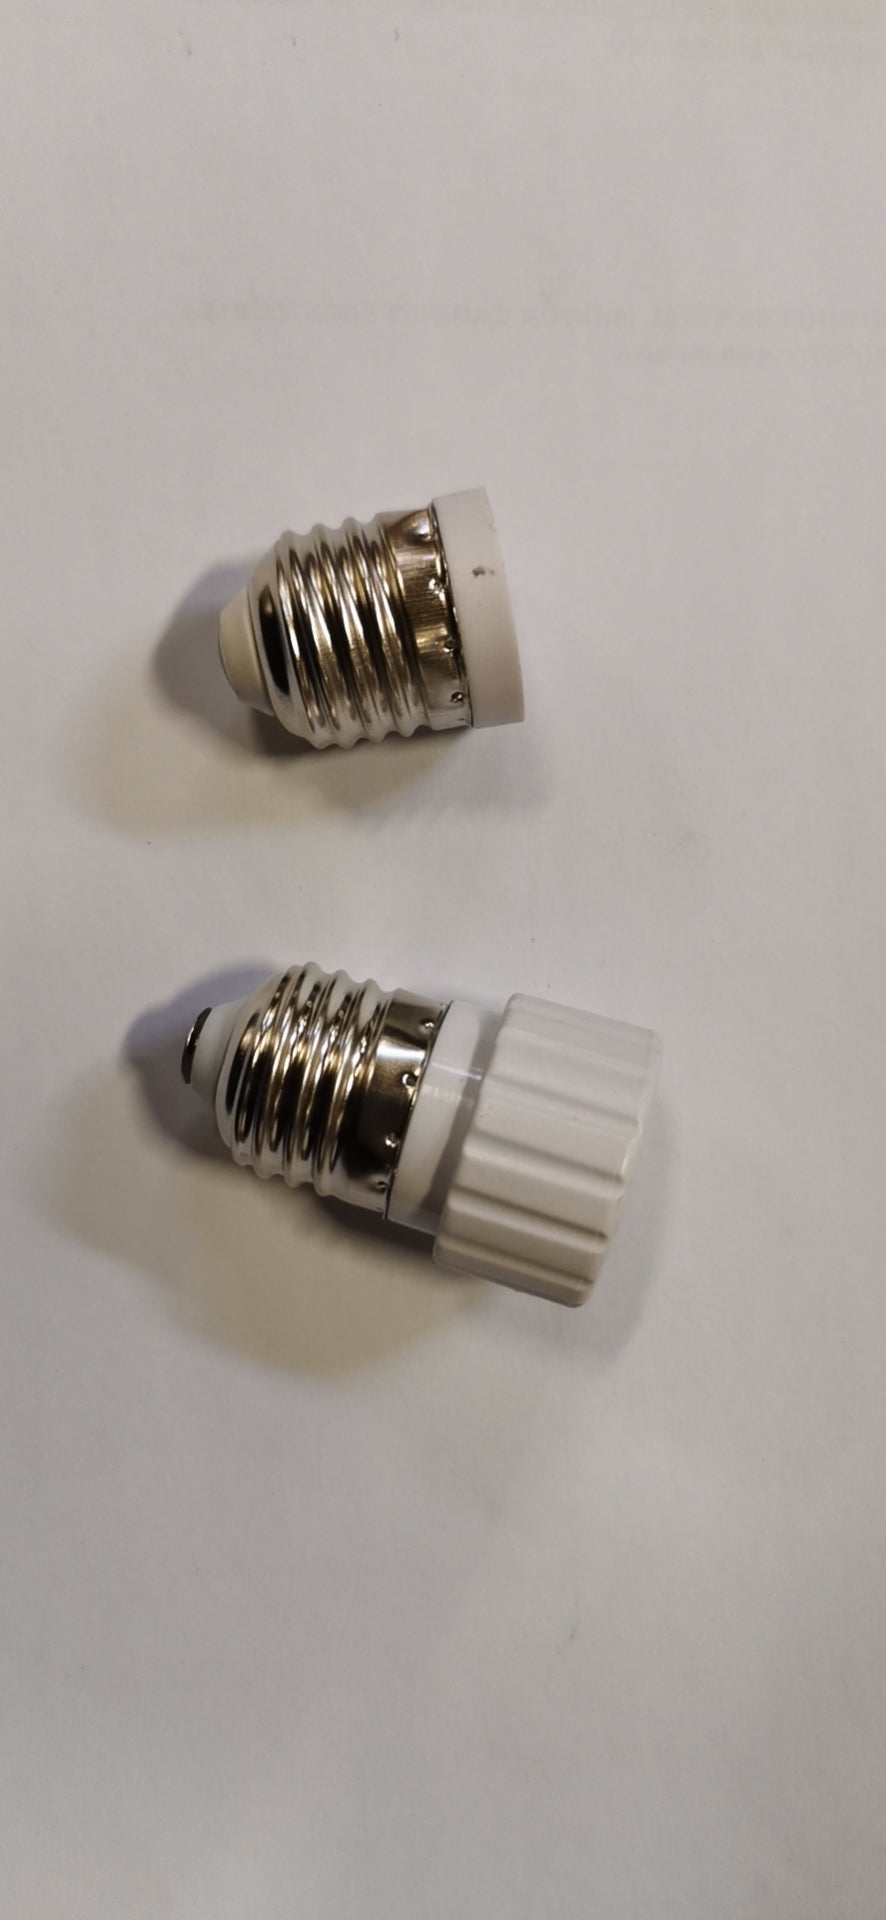 CANDLE ADAPTER/ GU10 ADAPTER $2.75/PC - Home Idol Home Improvement Outlet